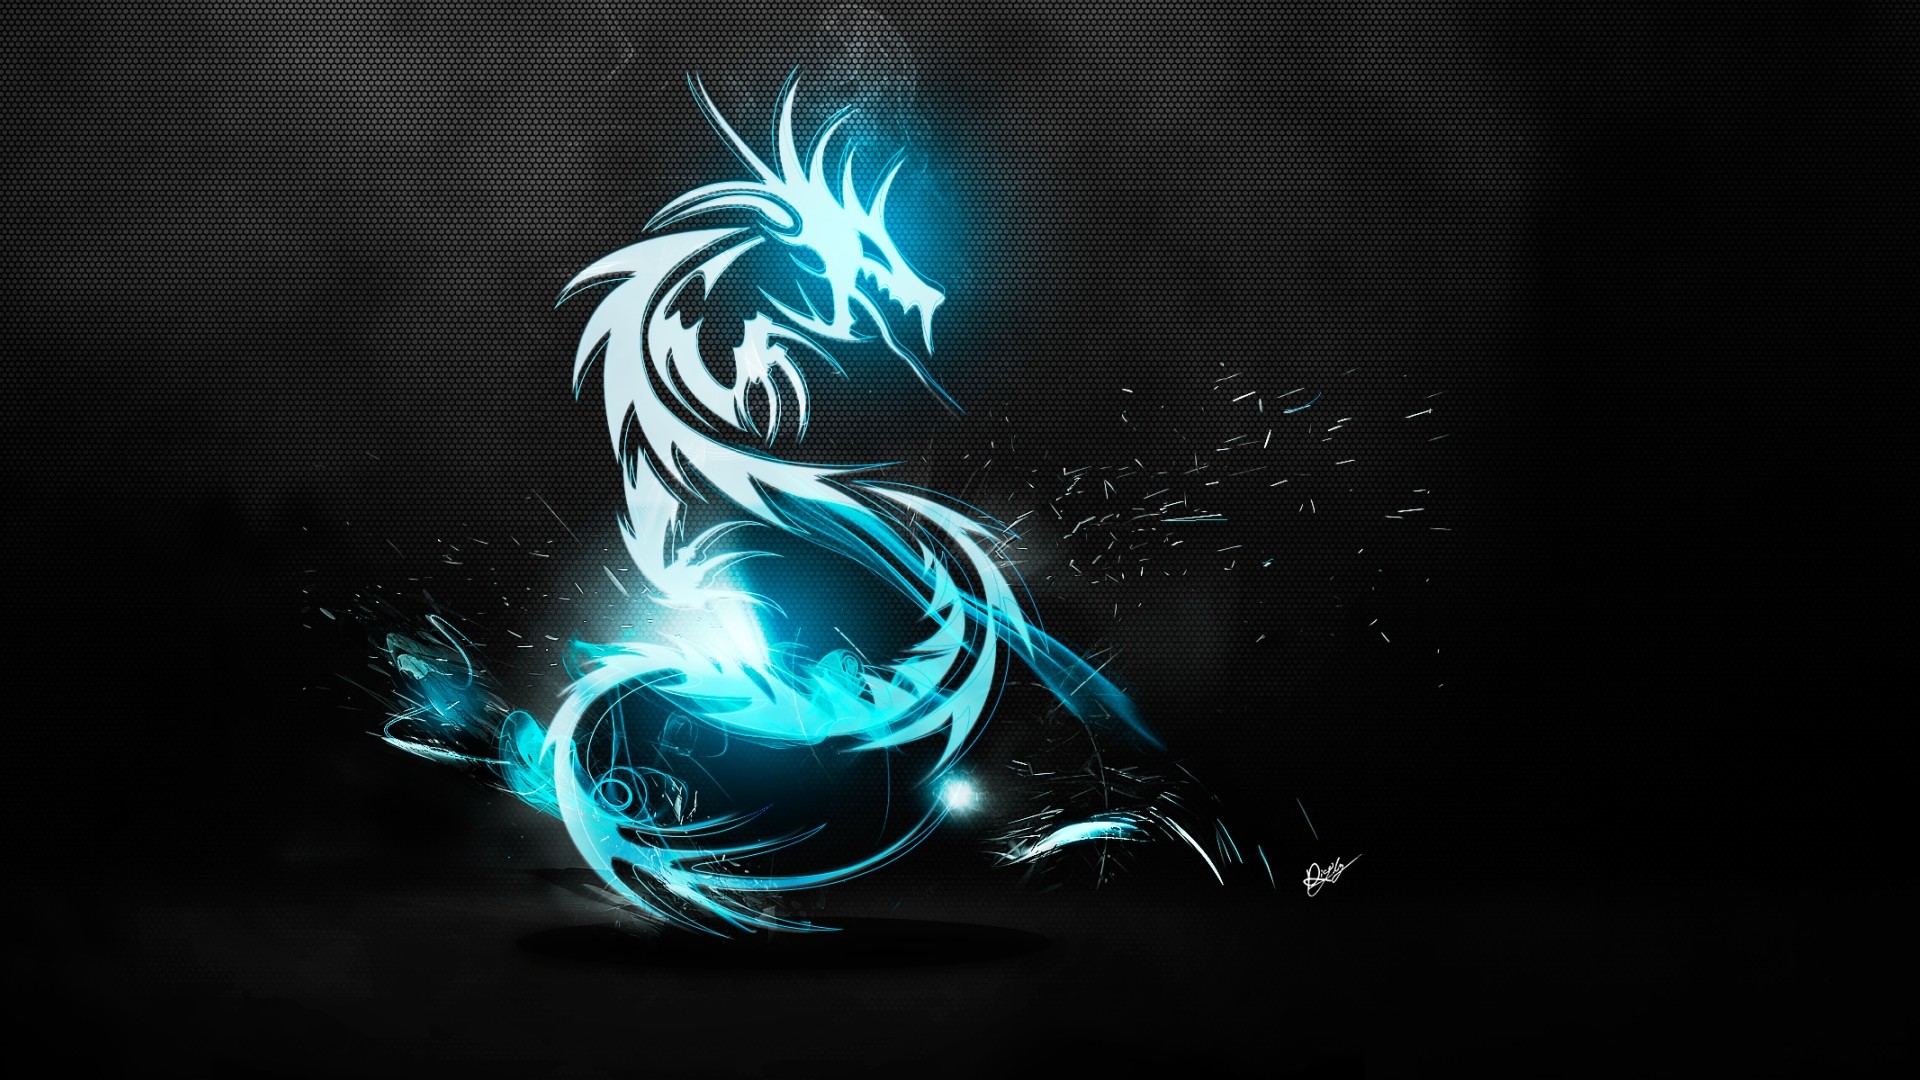 1920x1080 ... 1790 Dragon HD Wallpapers | Backgrounds - Wallpaper Abyss ...